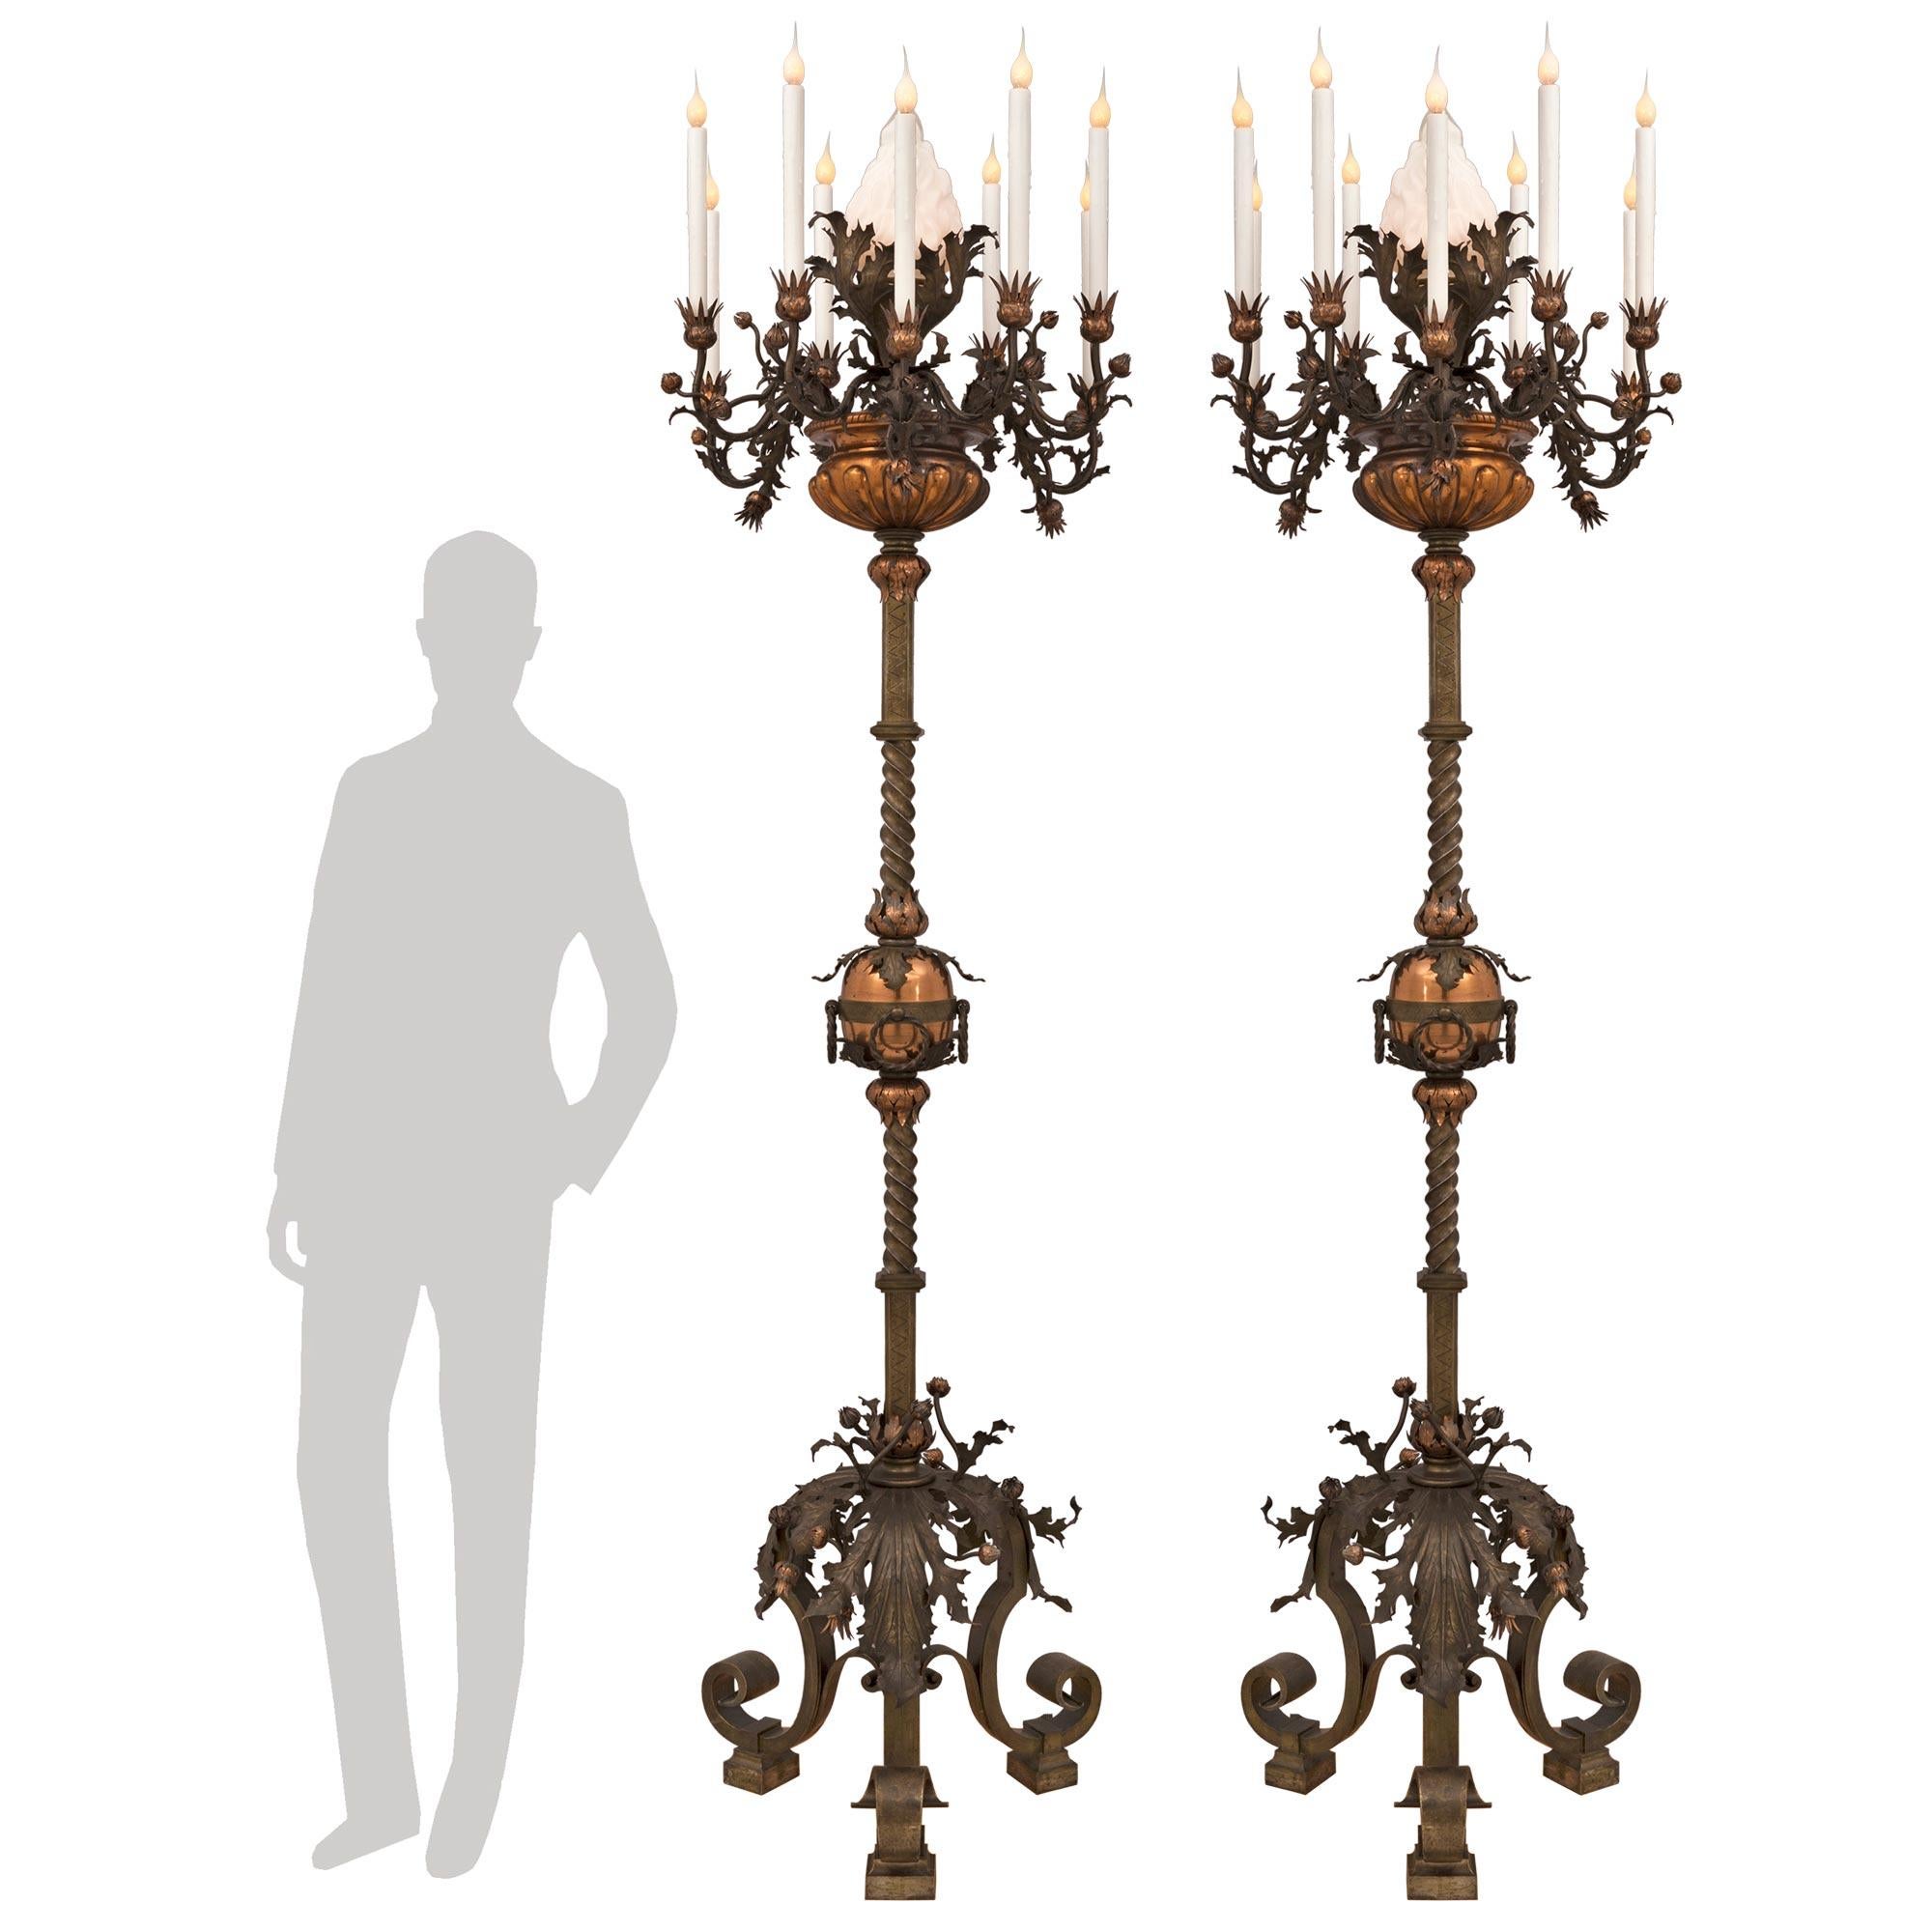 A stunning and palatially scaled pair of Spanish 19th century patinated bronze and copper Torchière floor lamps. Each most unique and extremely decorative ten light torchière is raised by an impressive 'S' scrolled tripod support with block feet and